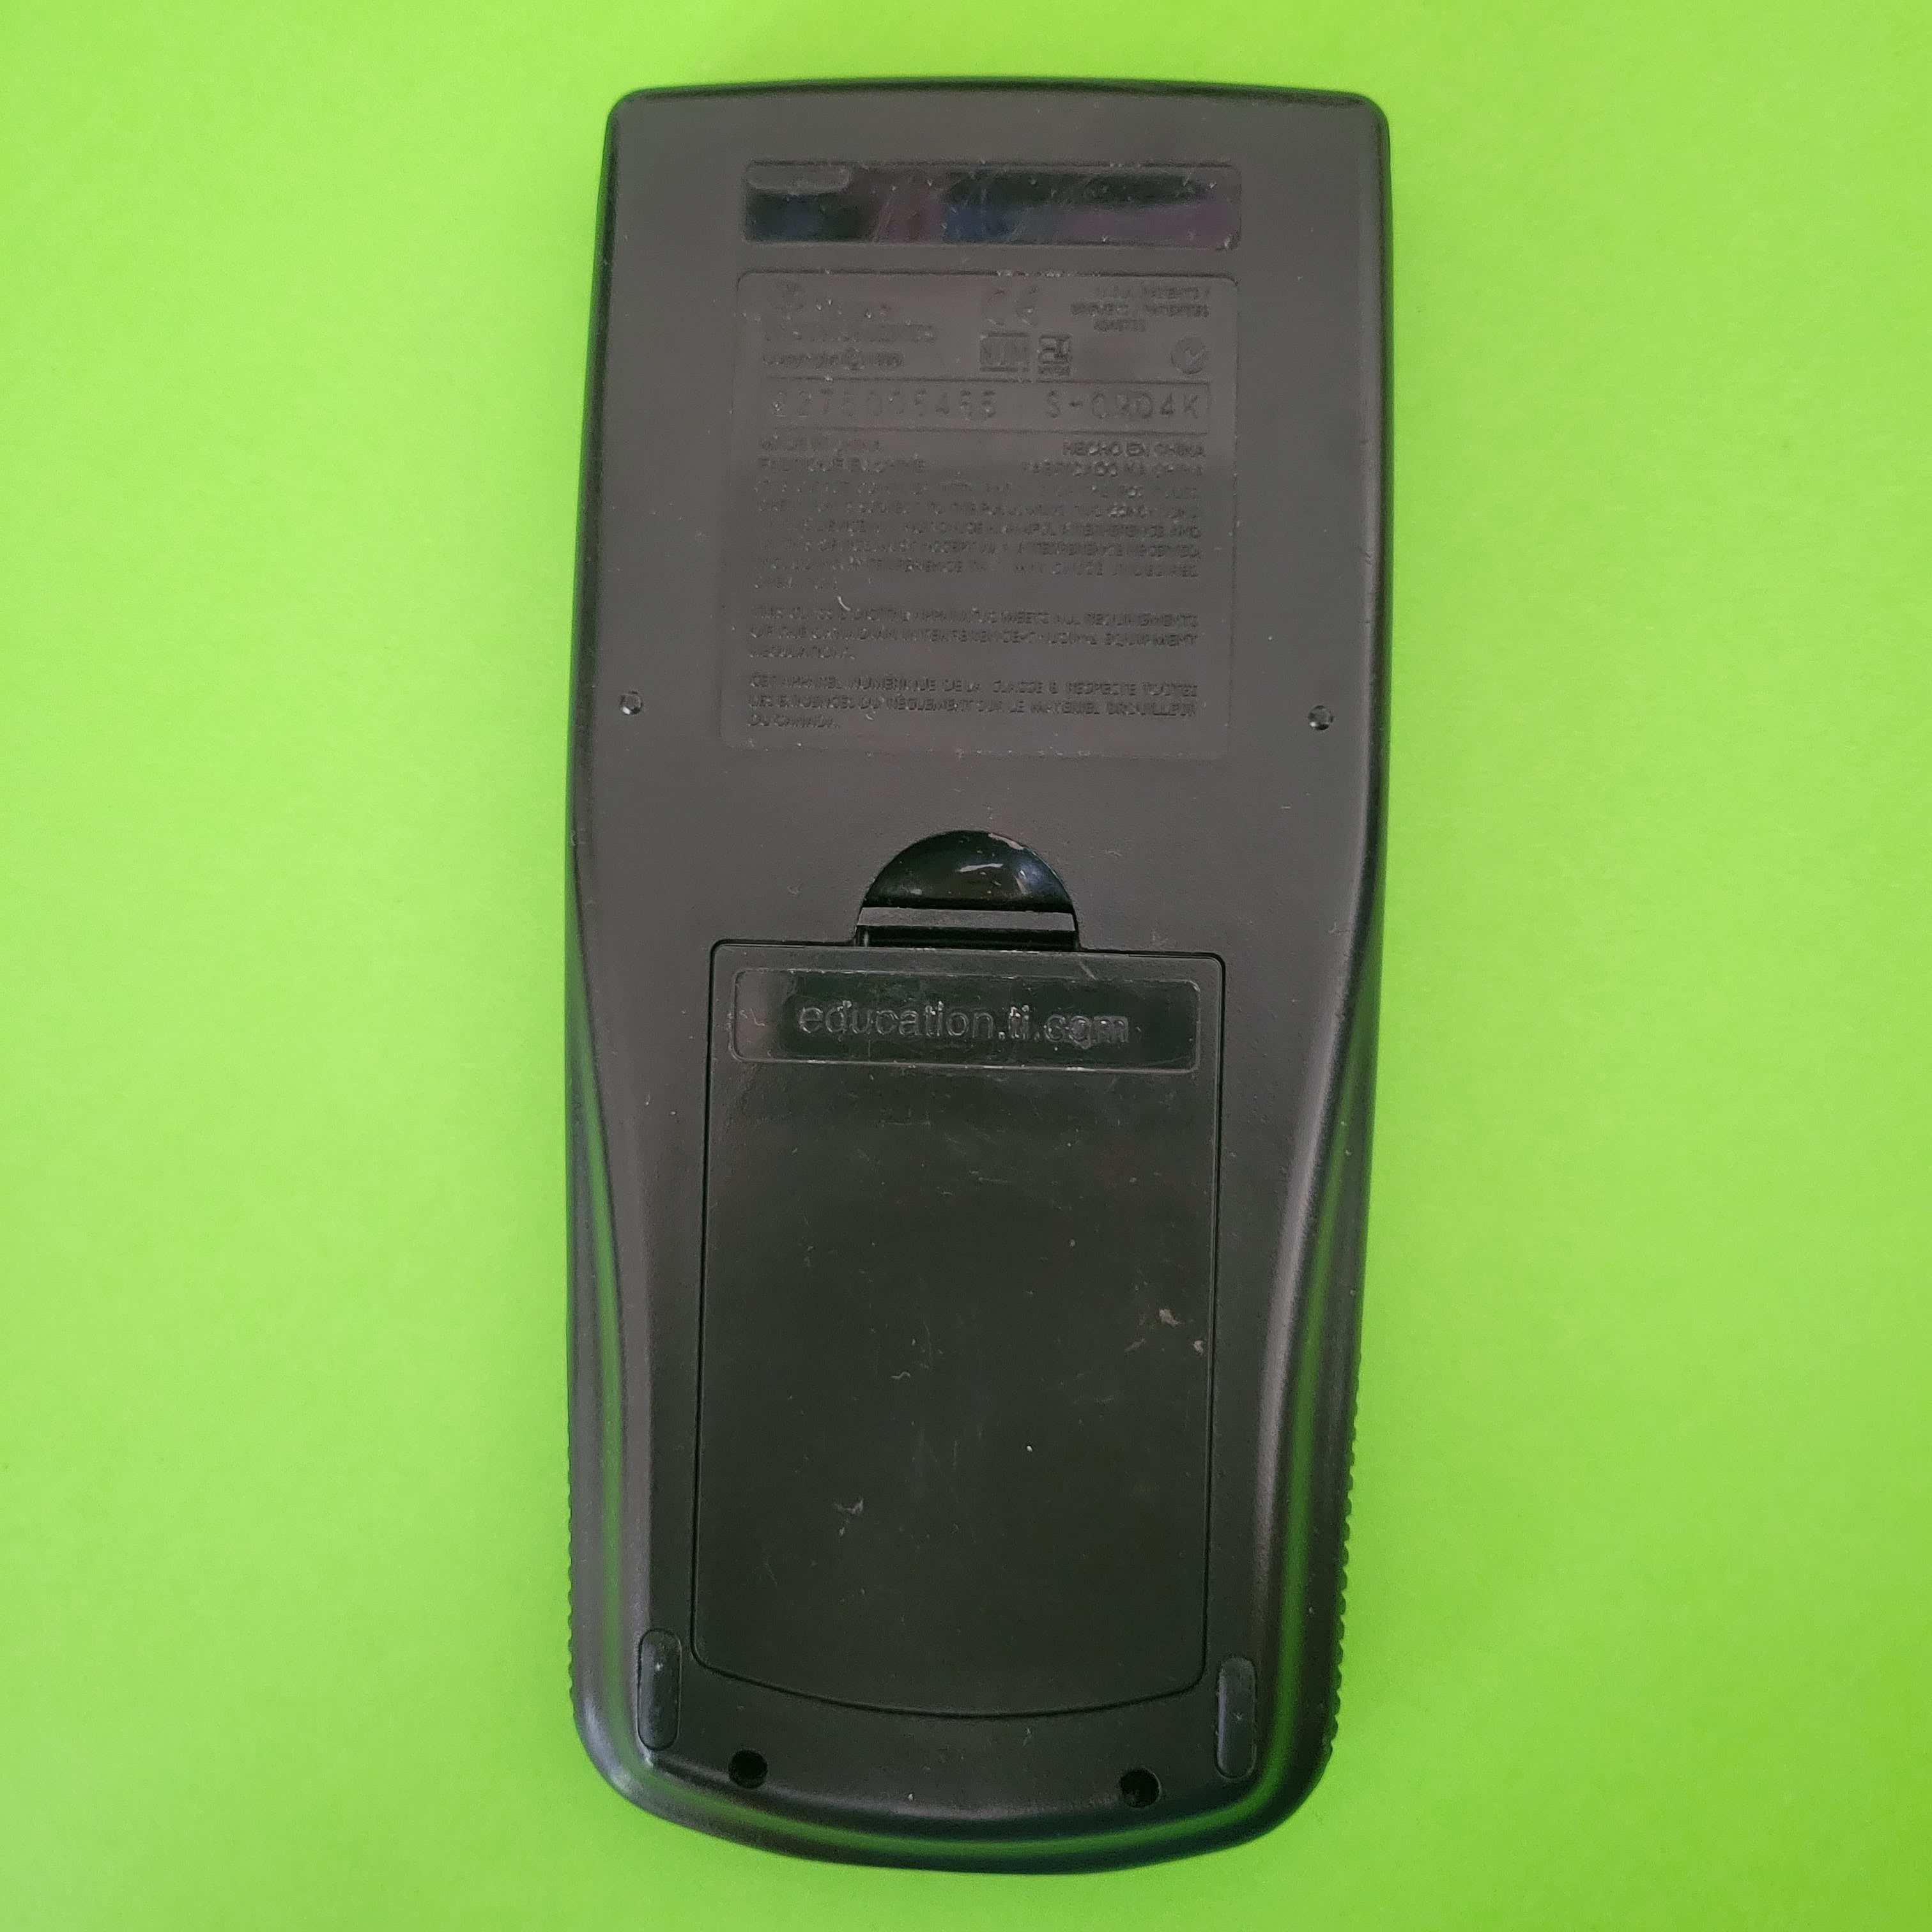 An image of the back of a texas instruments ti-86 graphing calculator